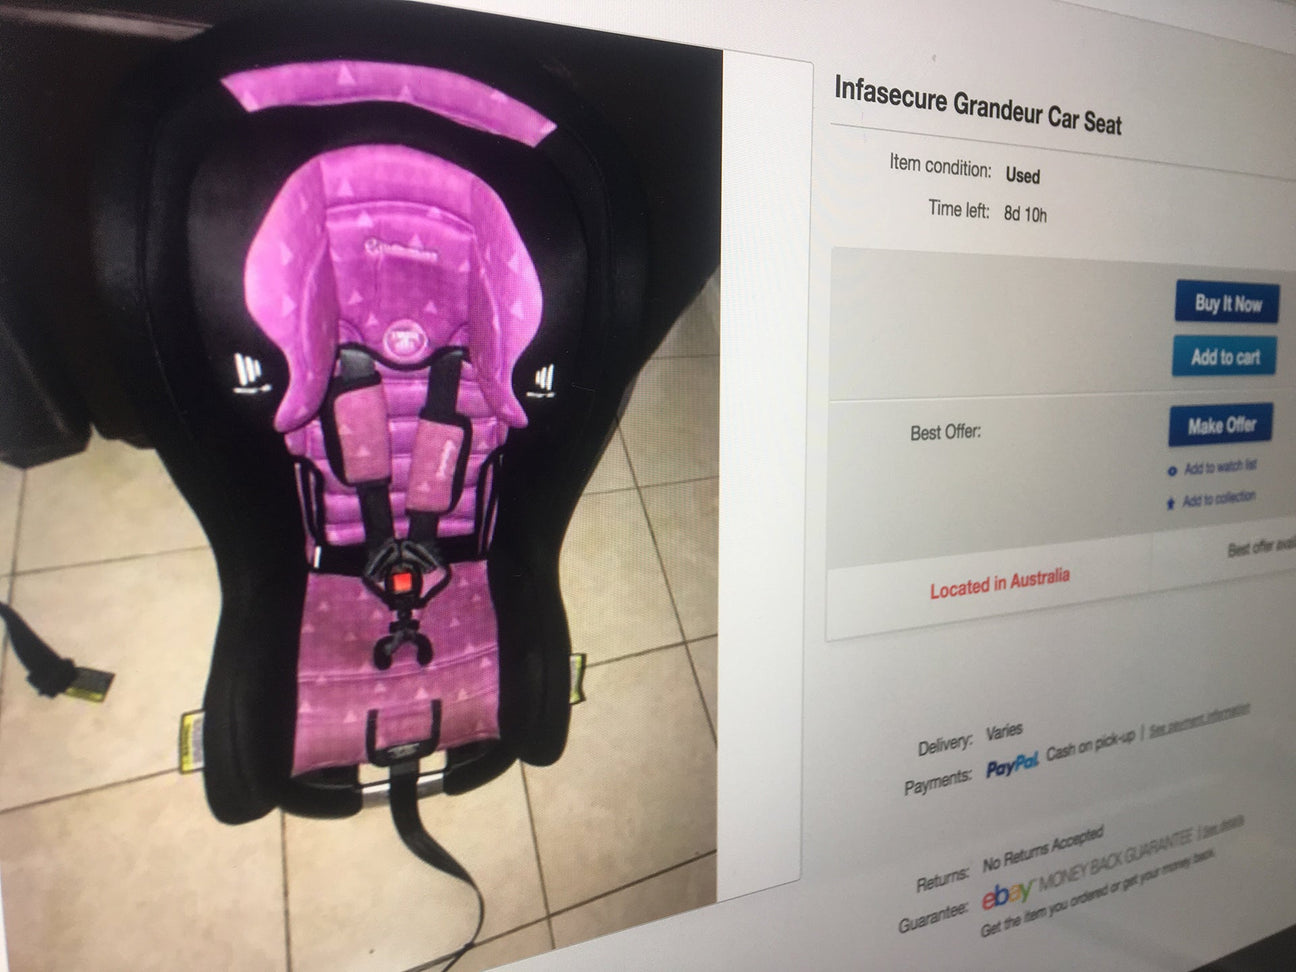 Second Hand Car Seats - Everything You Need to Know